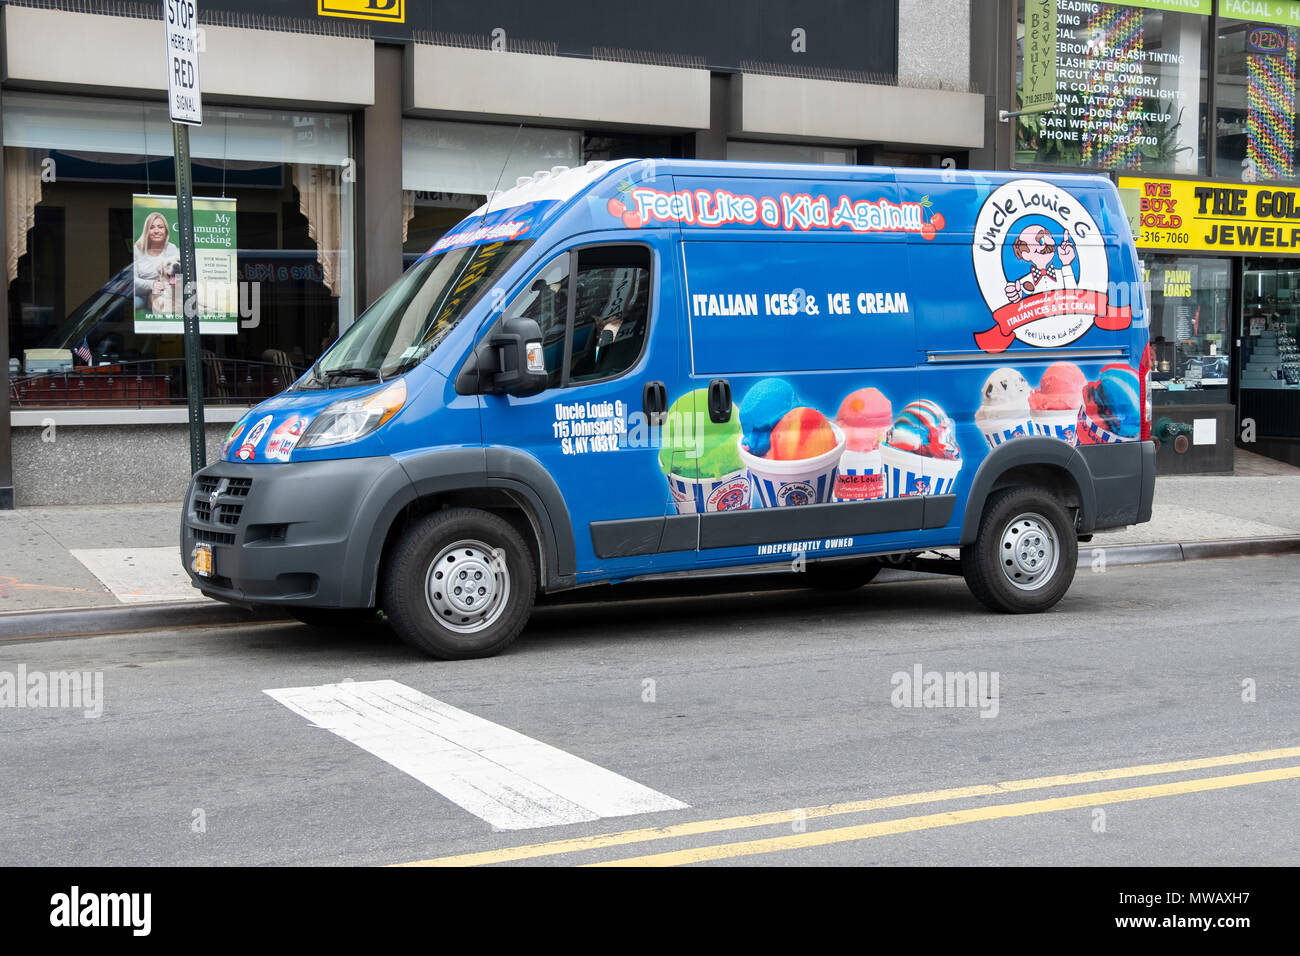 The UNCLE LOUIE G Italian ices & ice cream truck parked on Austin Street in Forest Hills, Queens, New York. Stock Photo